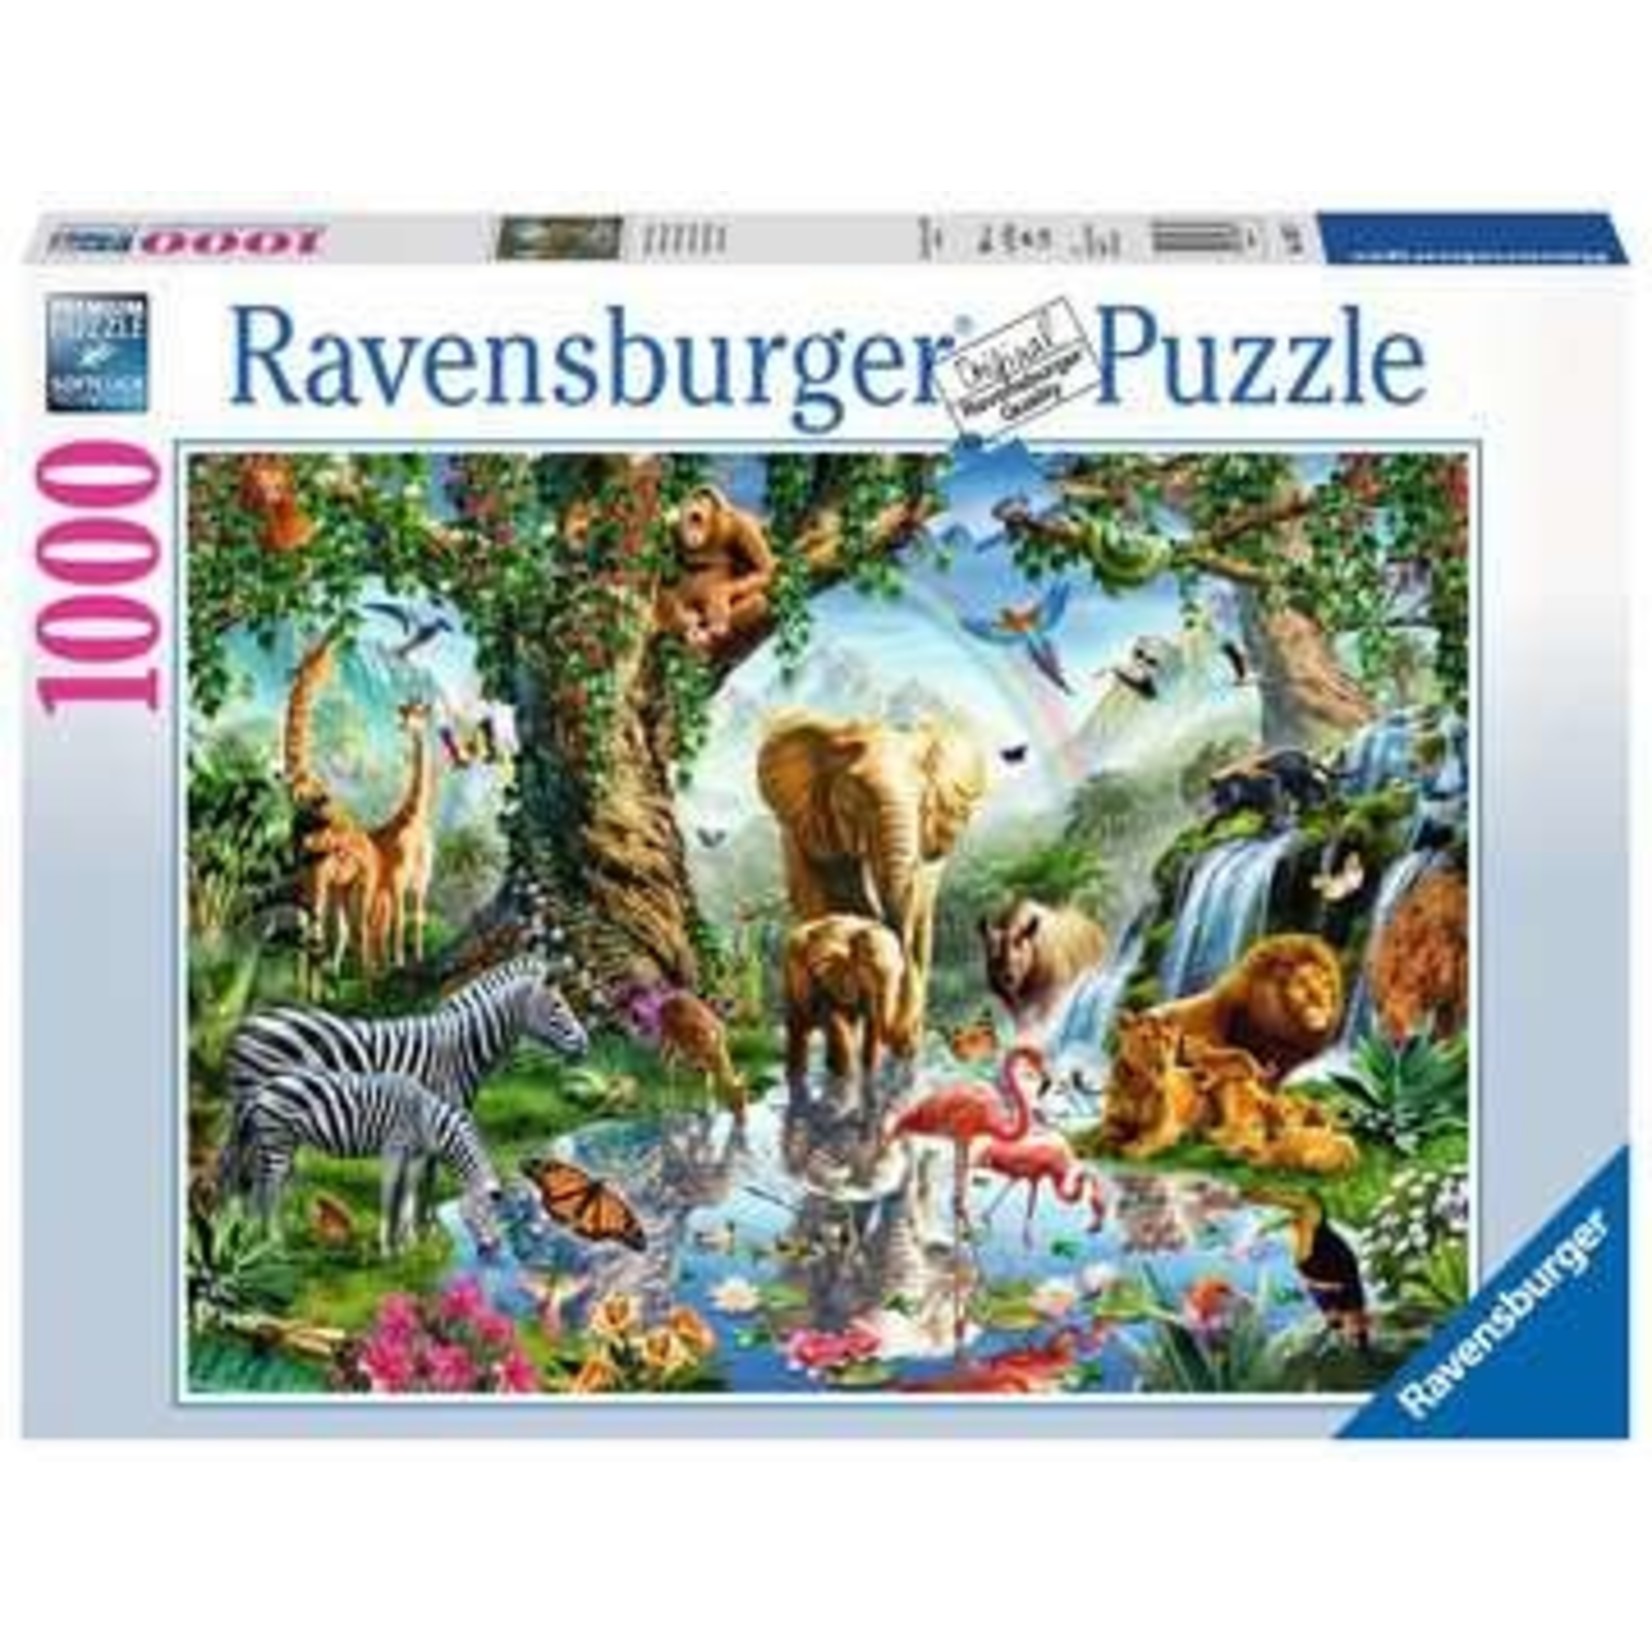 Adventures in the Jungle 1000 Piece Puzzle